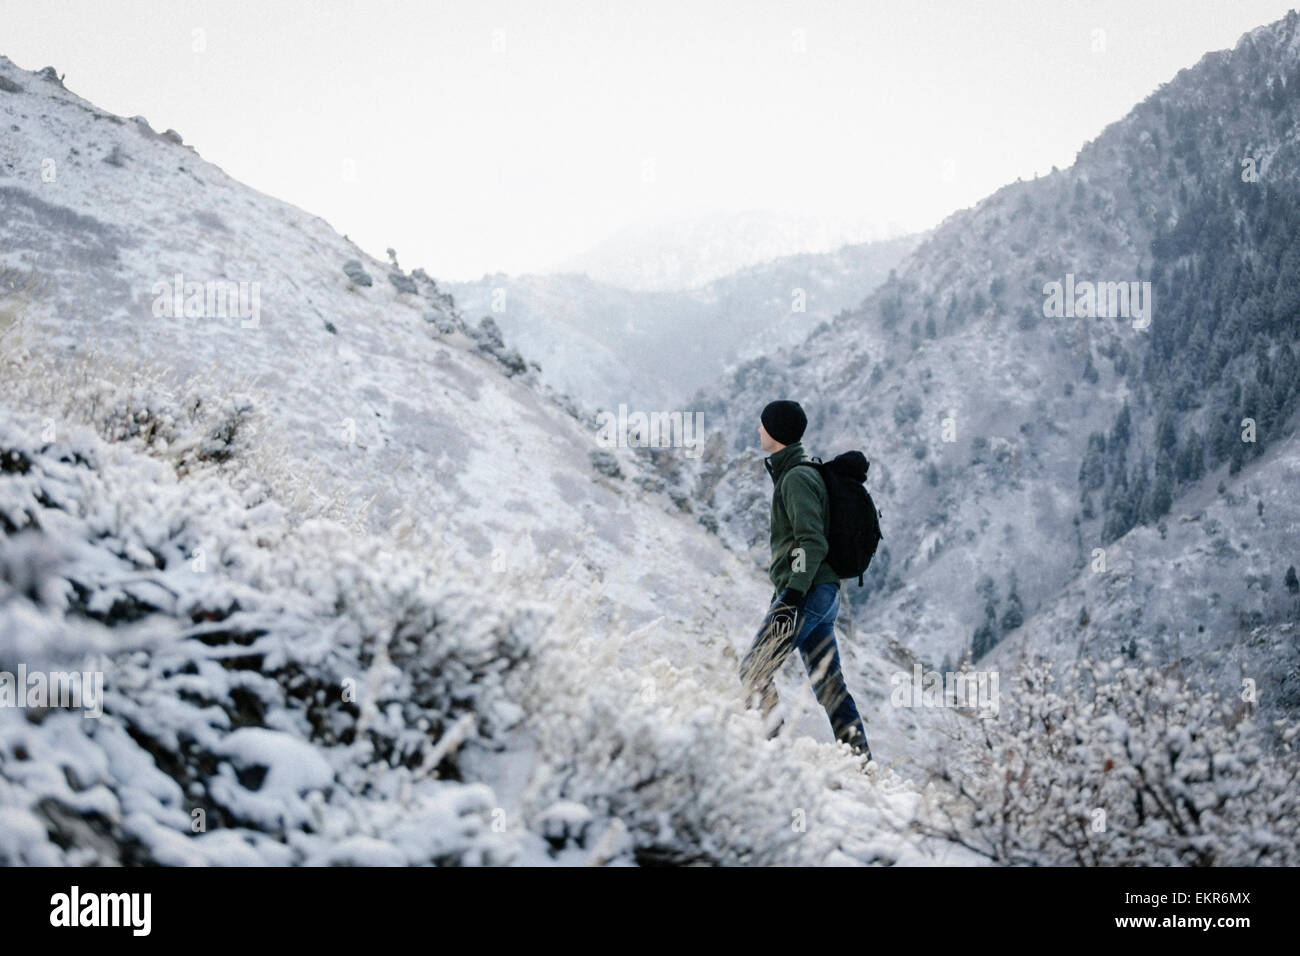 A man hiking through the mountains carrying a rucksack. Stock Photo